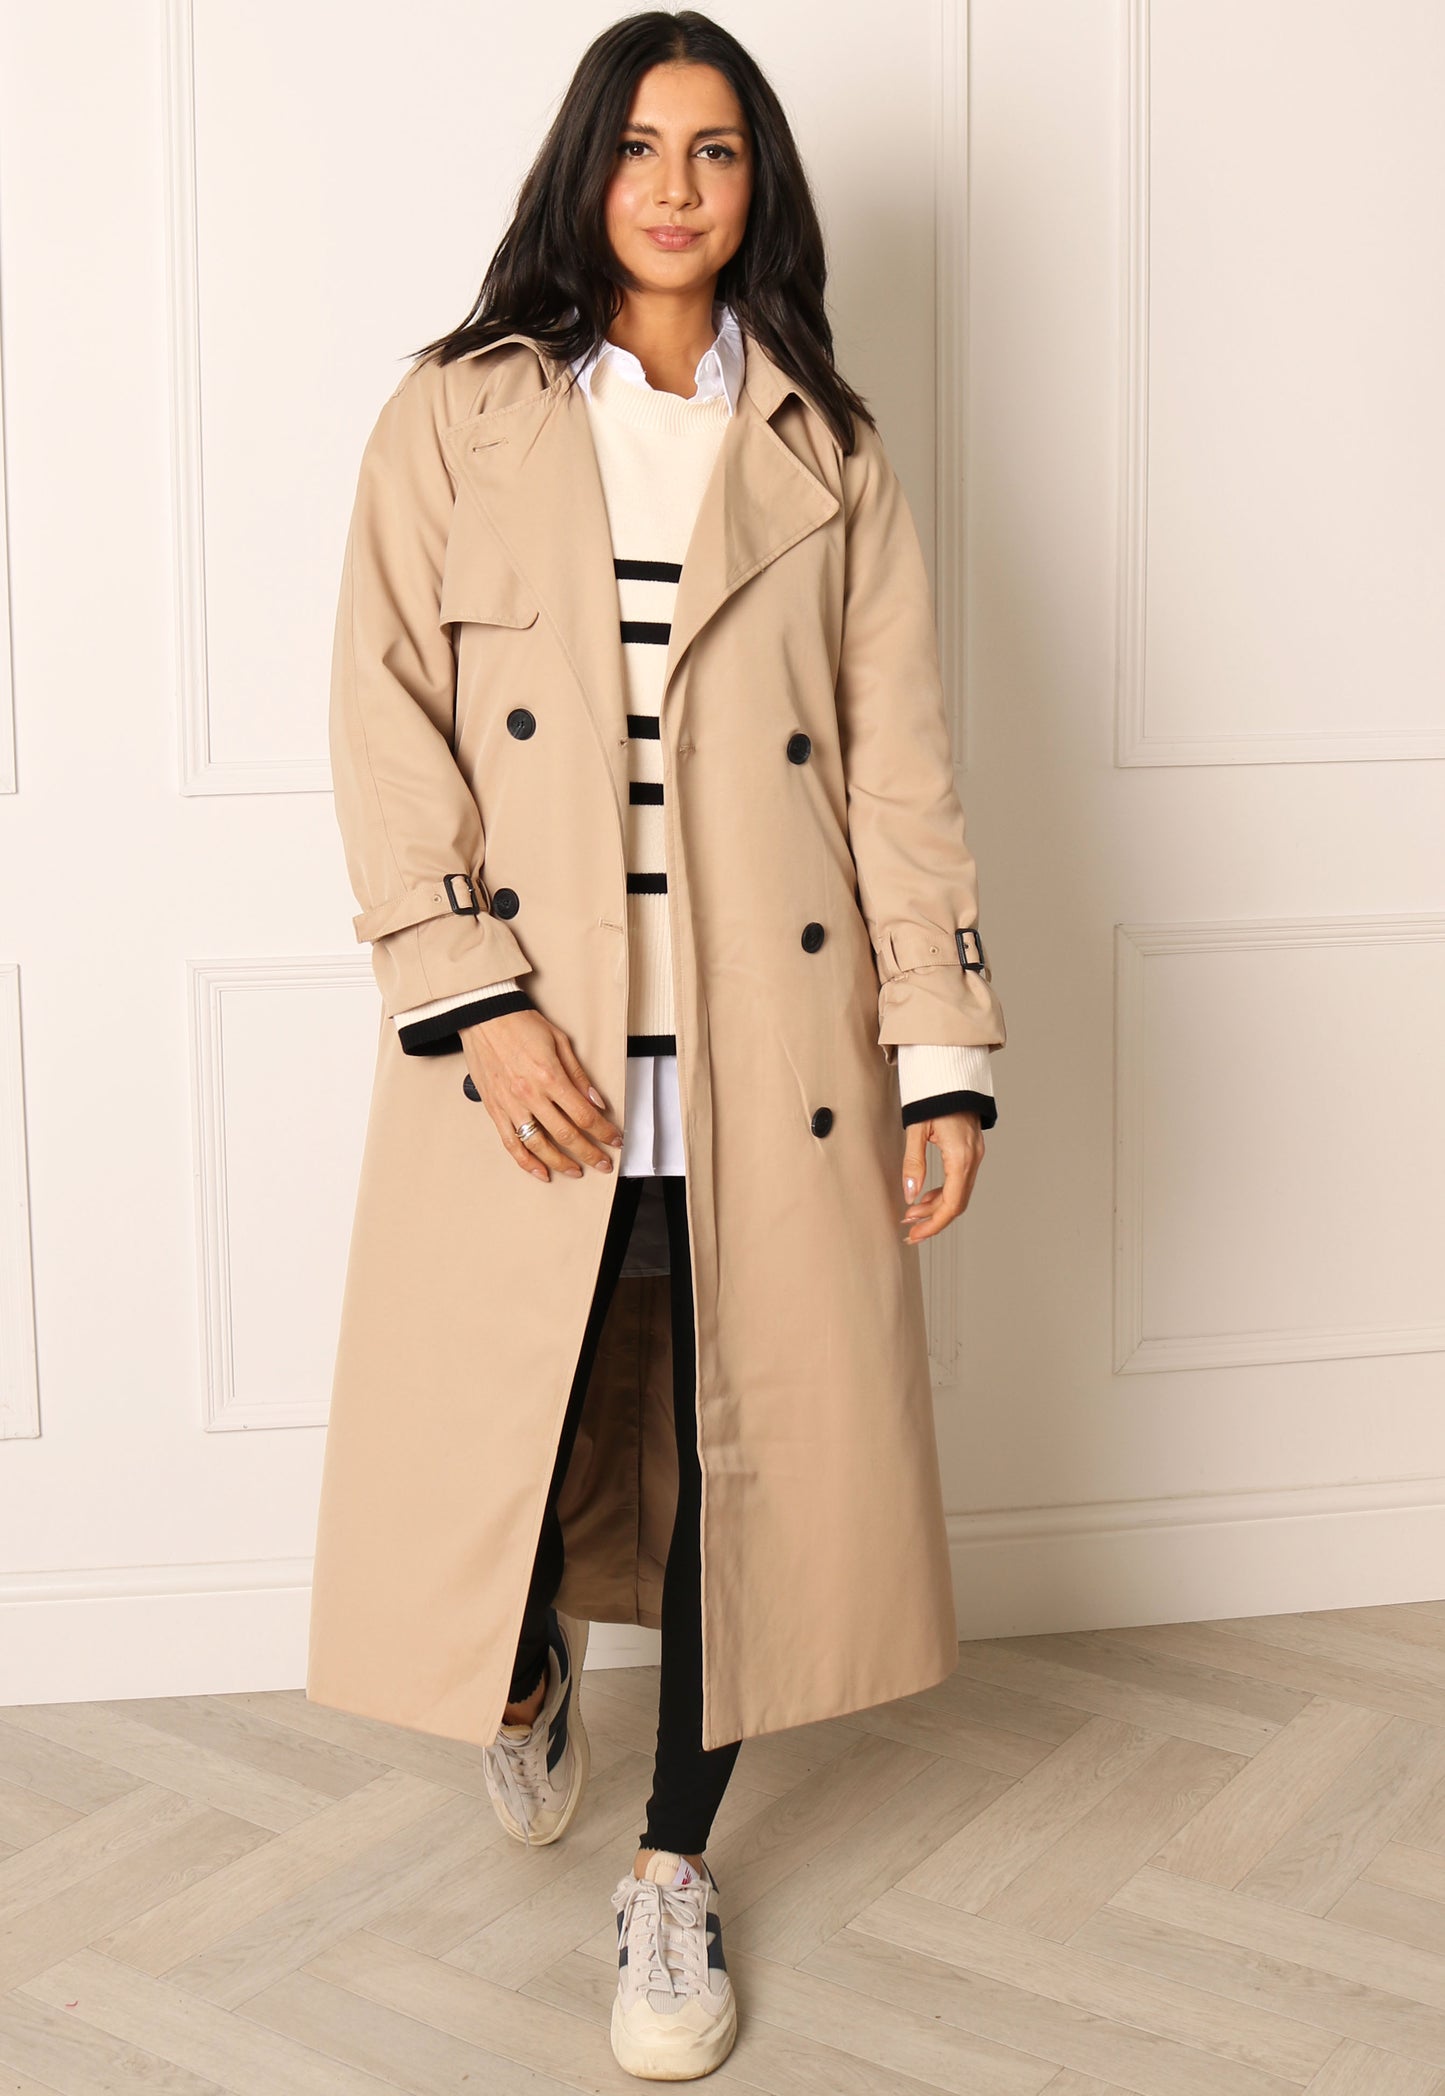 ONLY Chloe Double Breasted Longline Trench Coat in Beige - concretebartops